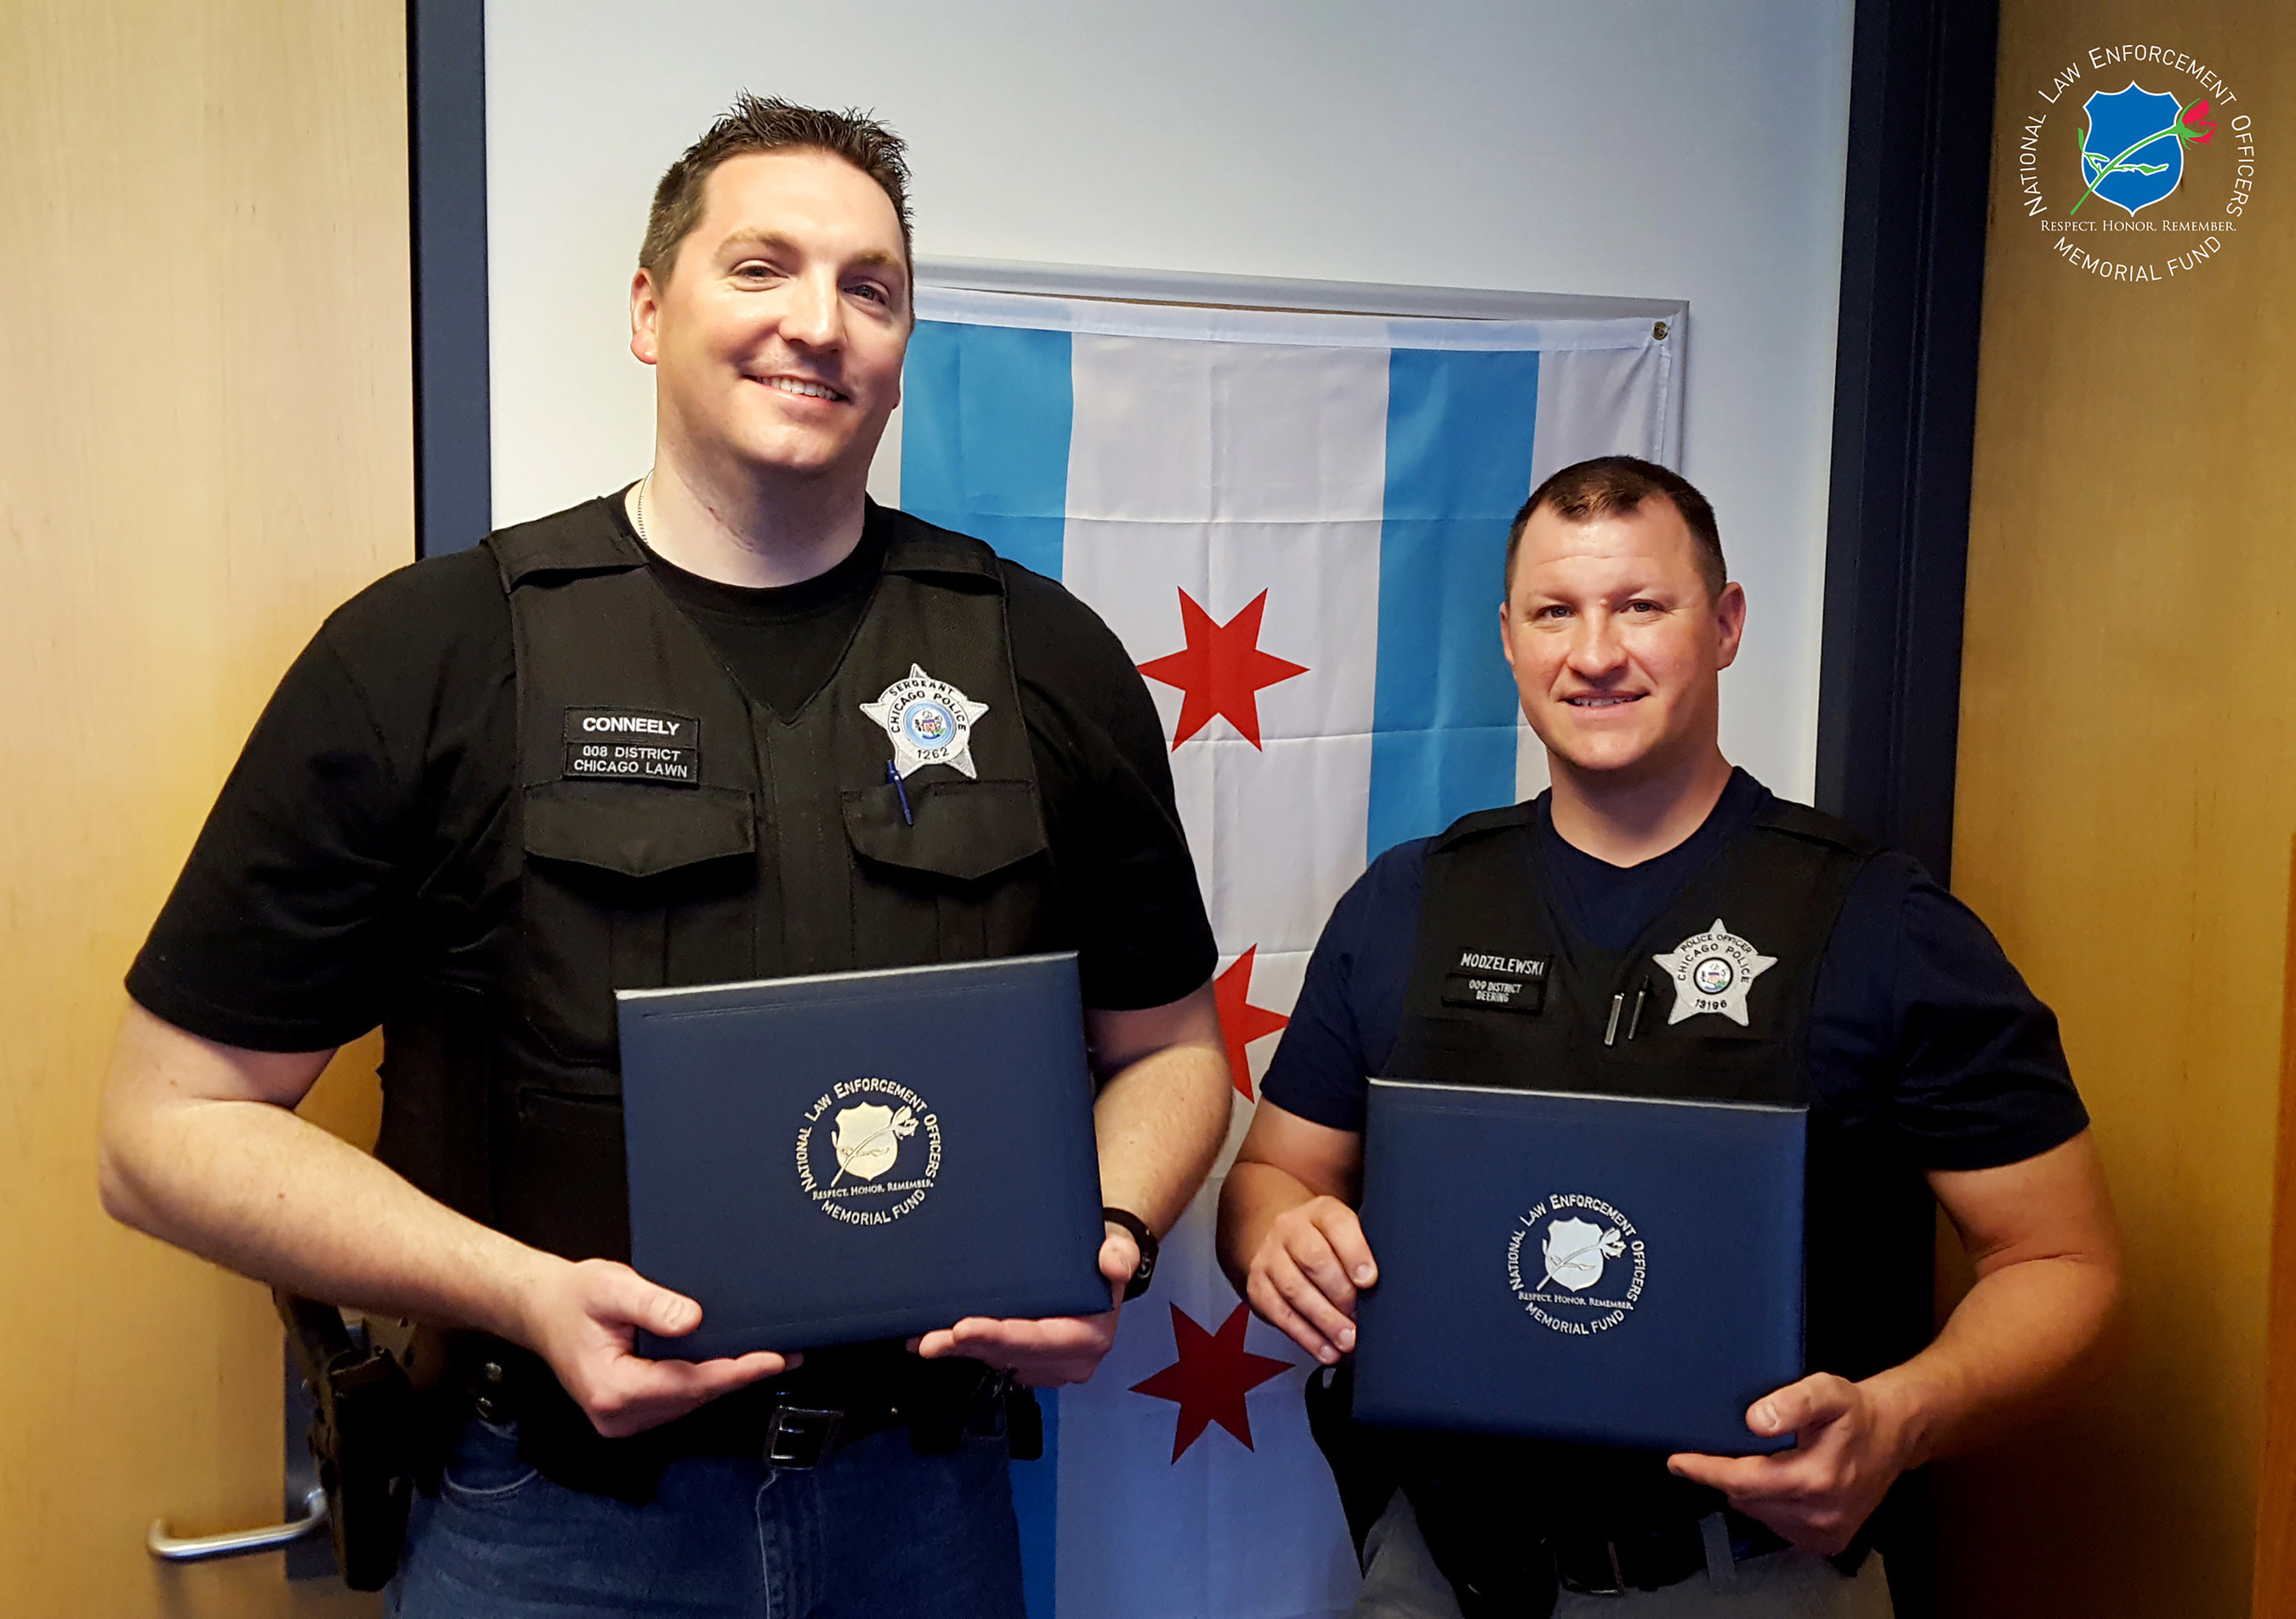 The National Law Enforcement Officers Memorial Fund has selected Sergeant John Conneely and Officer Michael Modzelewski of the Chicago (IL) Police Department, as the recipients of its Officer of the Month Award for April 2016.